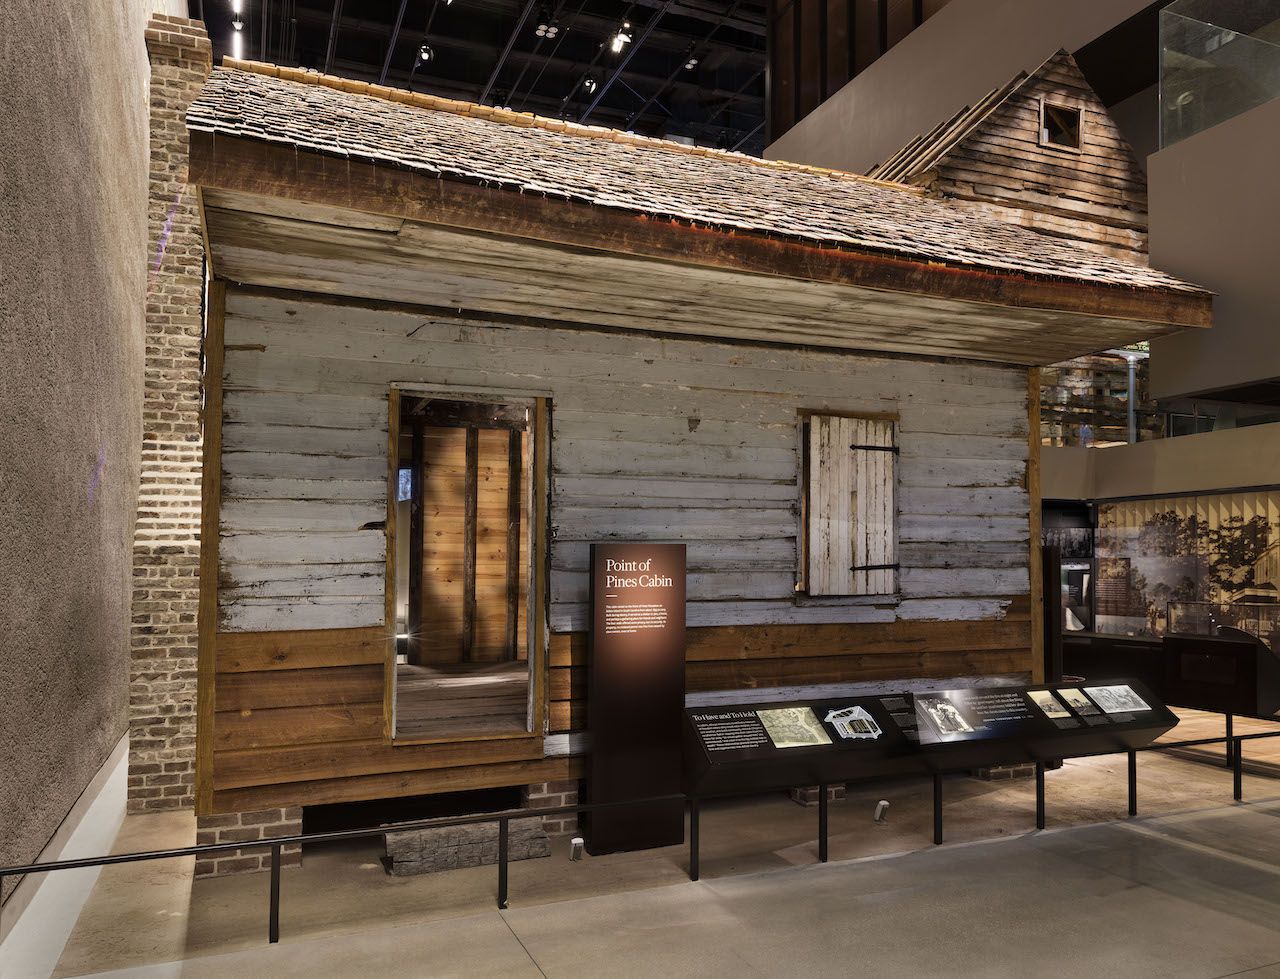 Slavery and Freedom exhibit at the National Museum of African American History and Culture